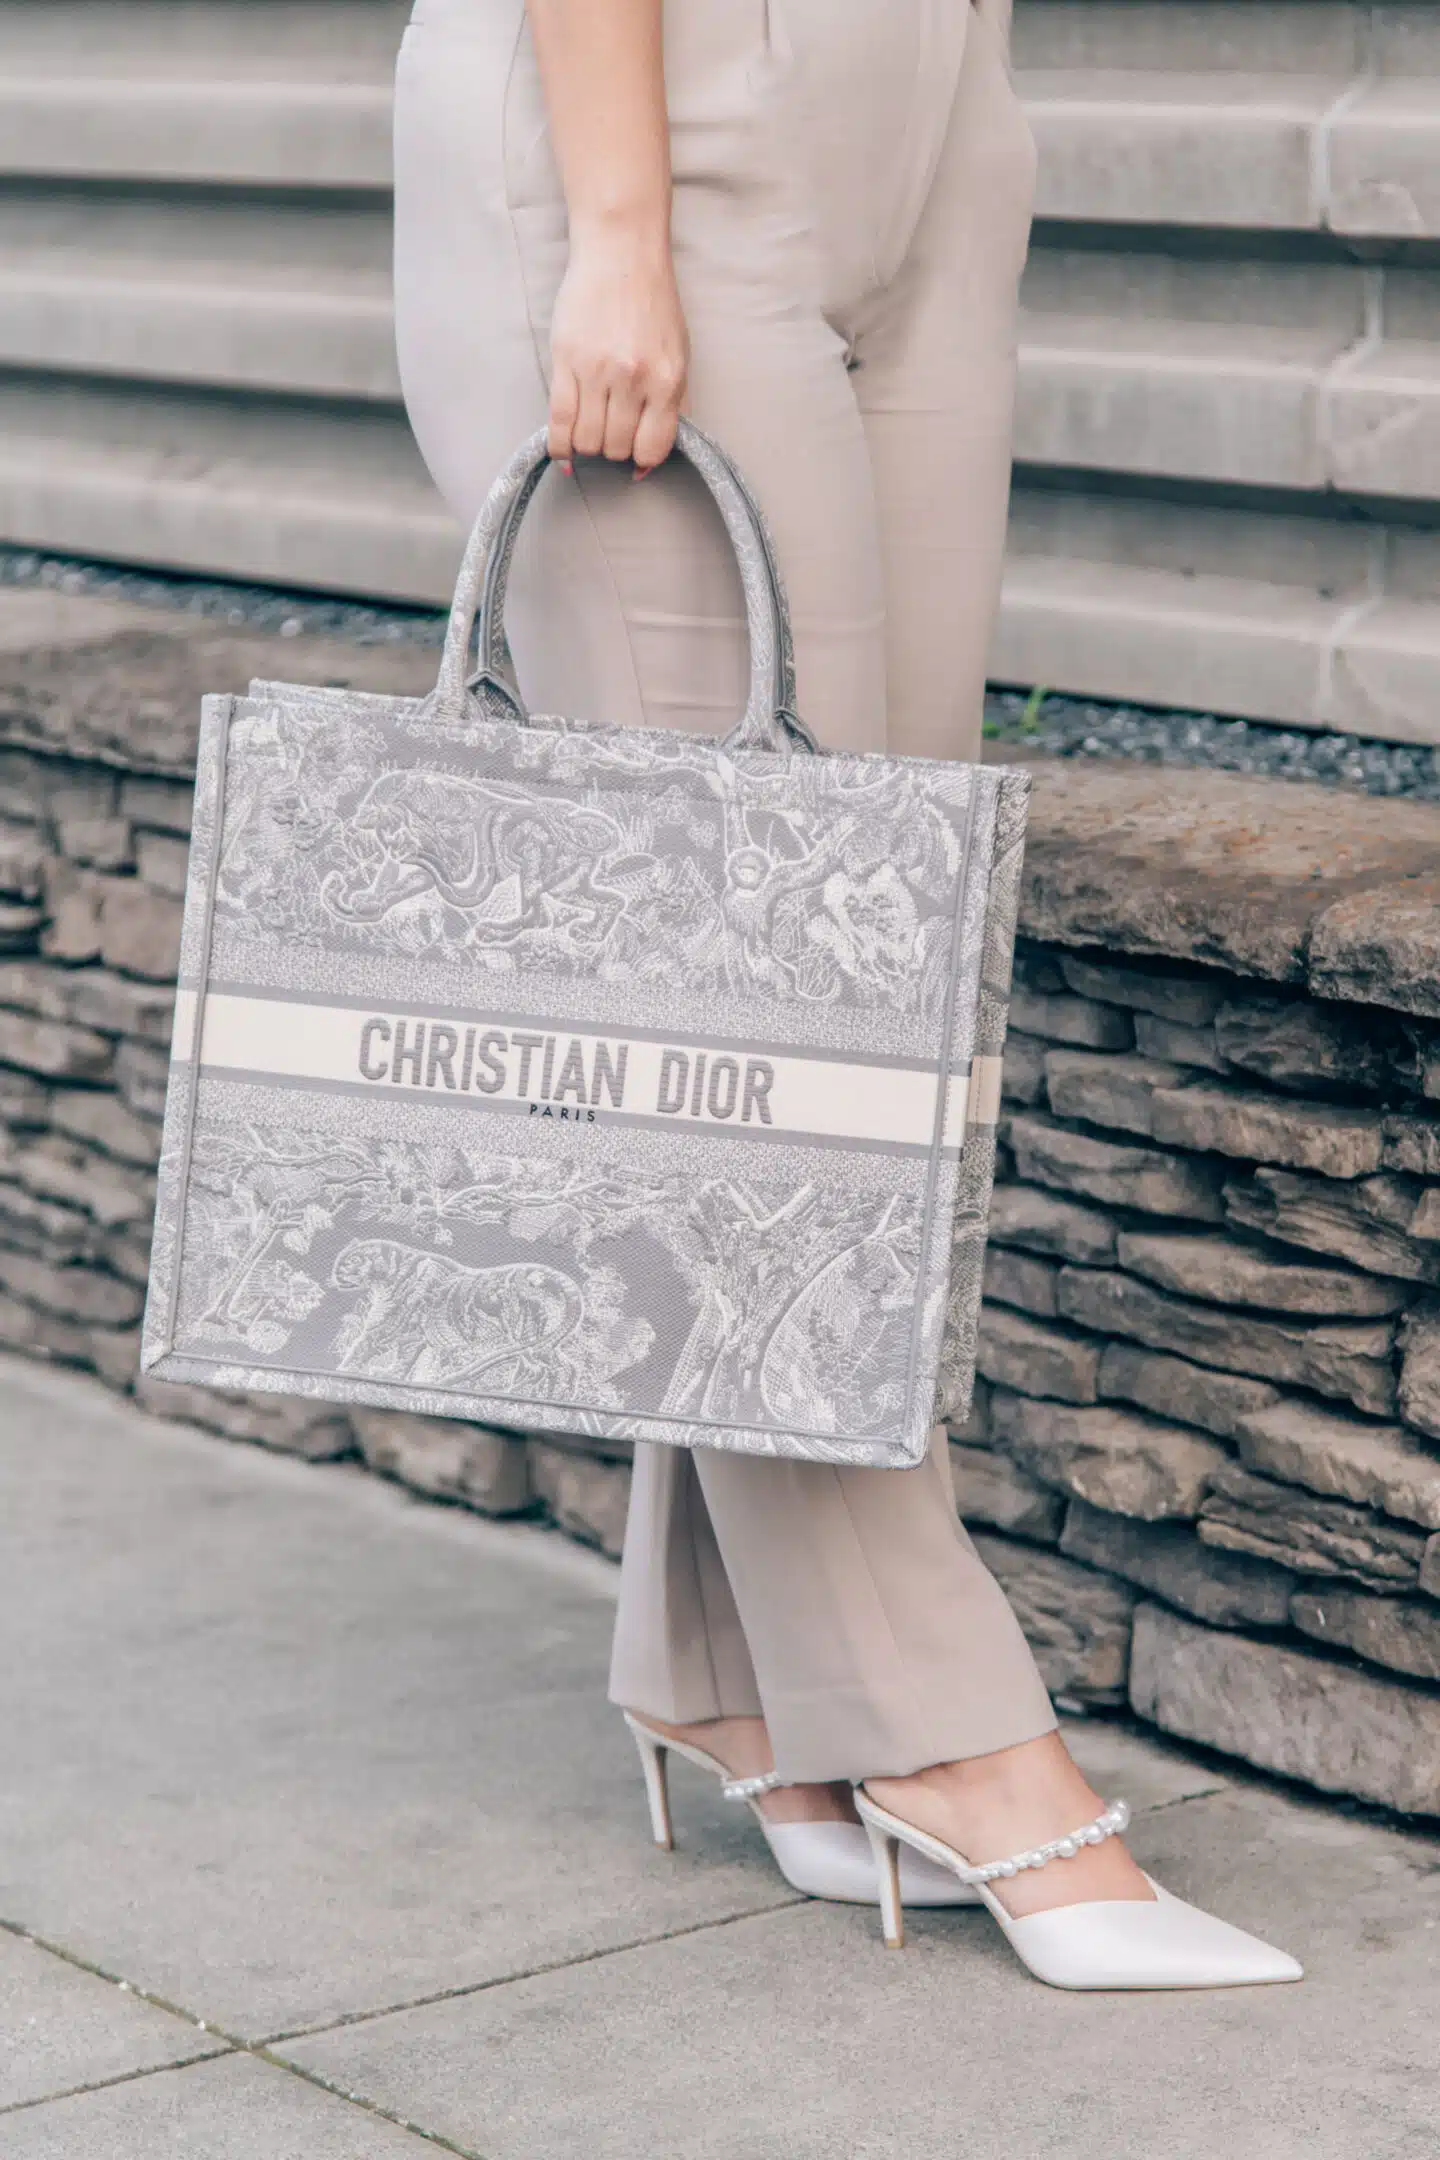 The best Christian dior tote bag dupe, by fashion blogger What The Fab